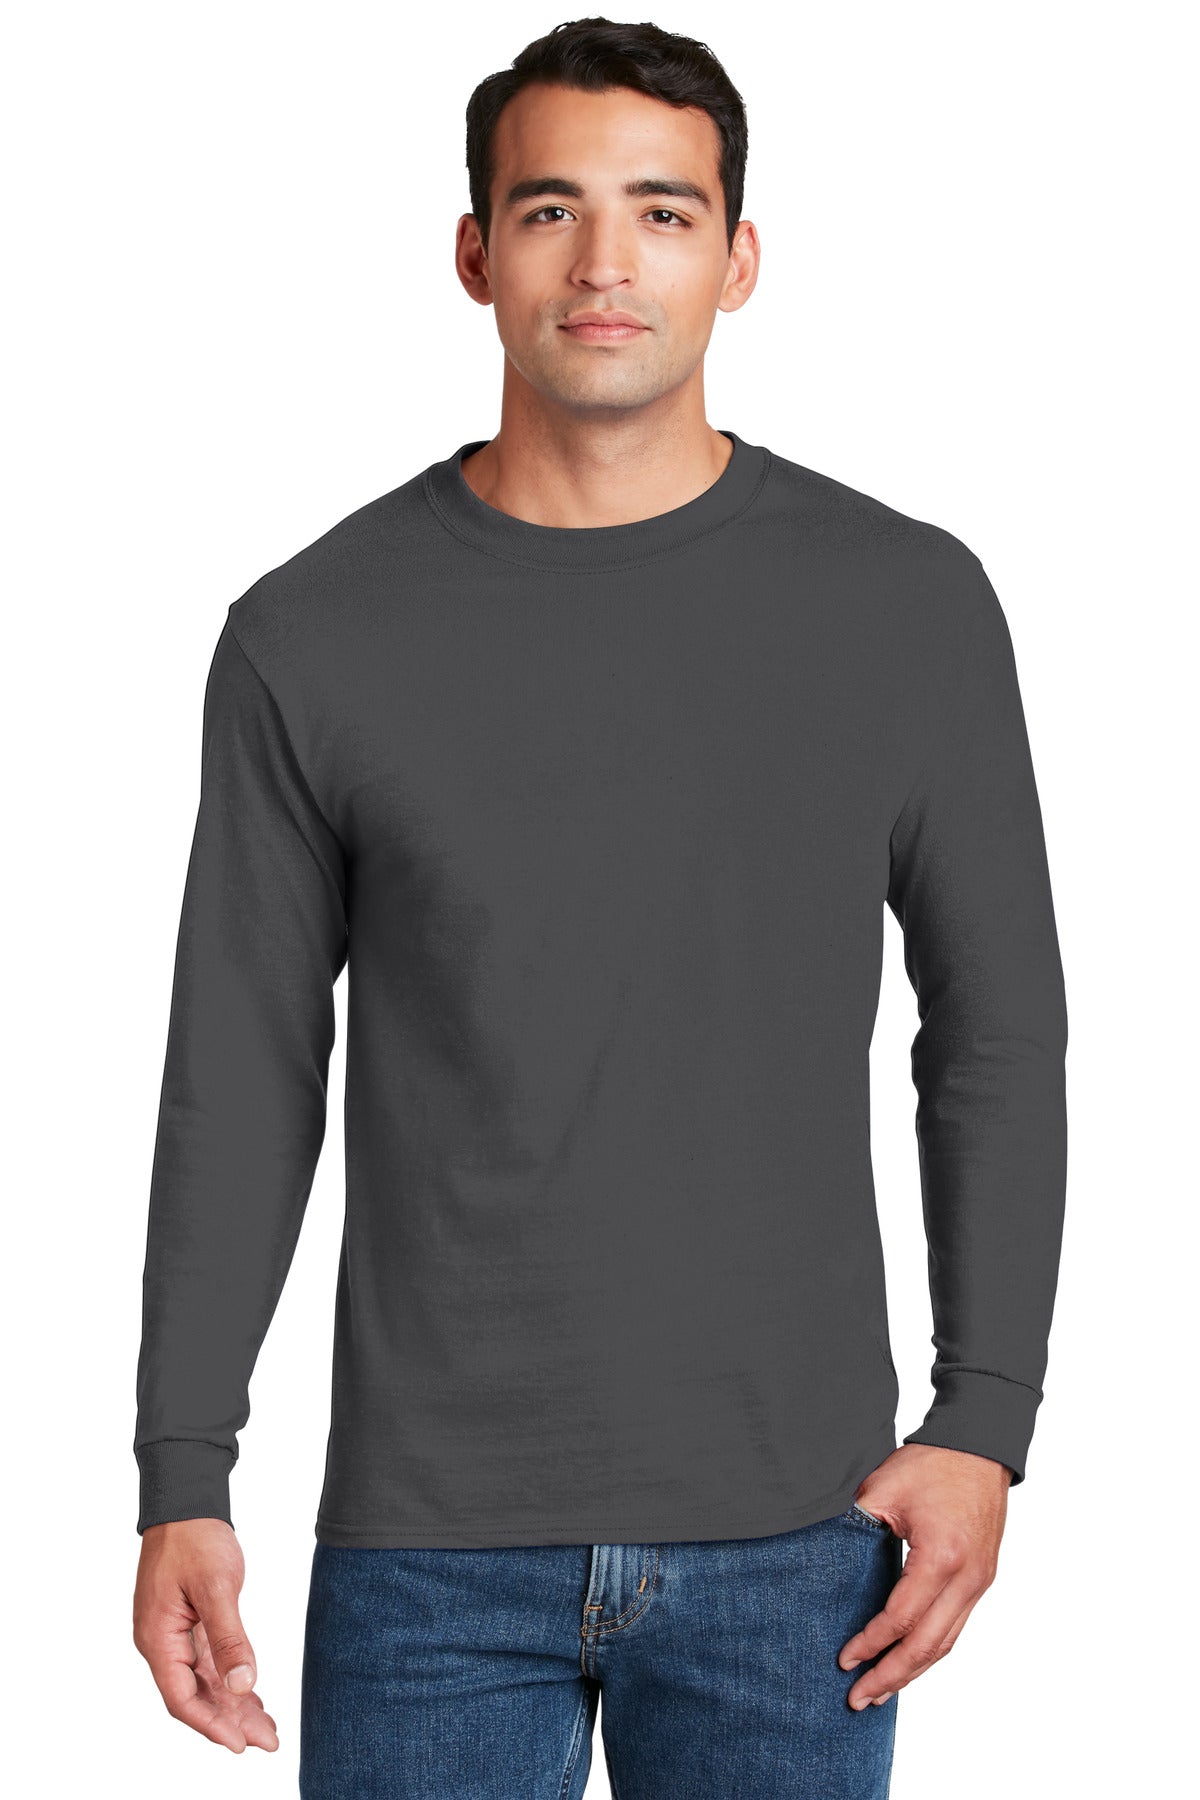 Hanes?Beefy-T?-  100% Cotton Long Sleeve T-Shirt.  5186